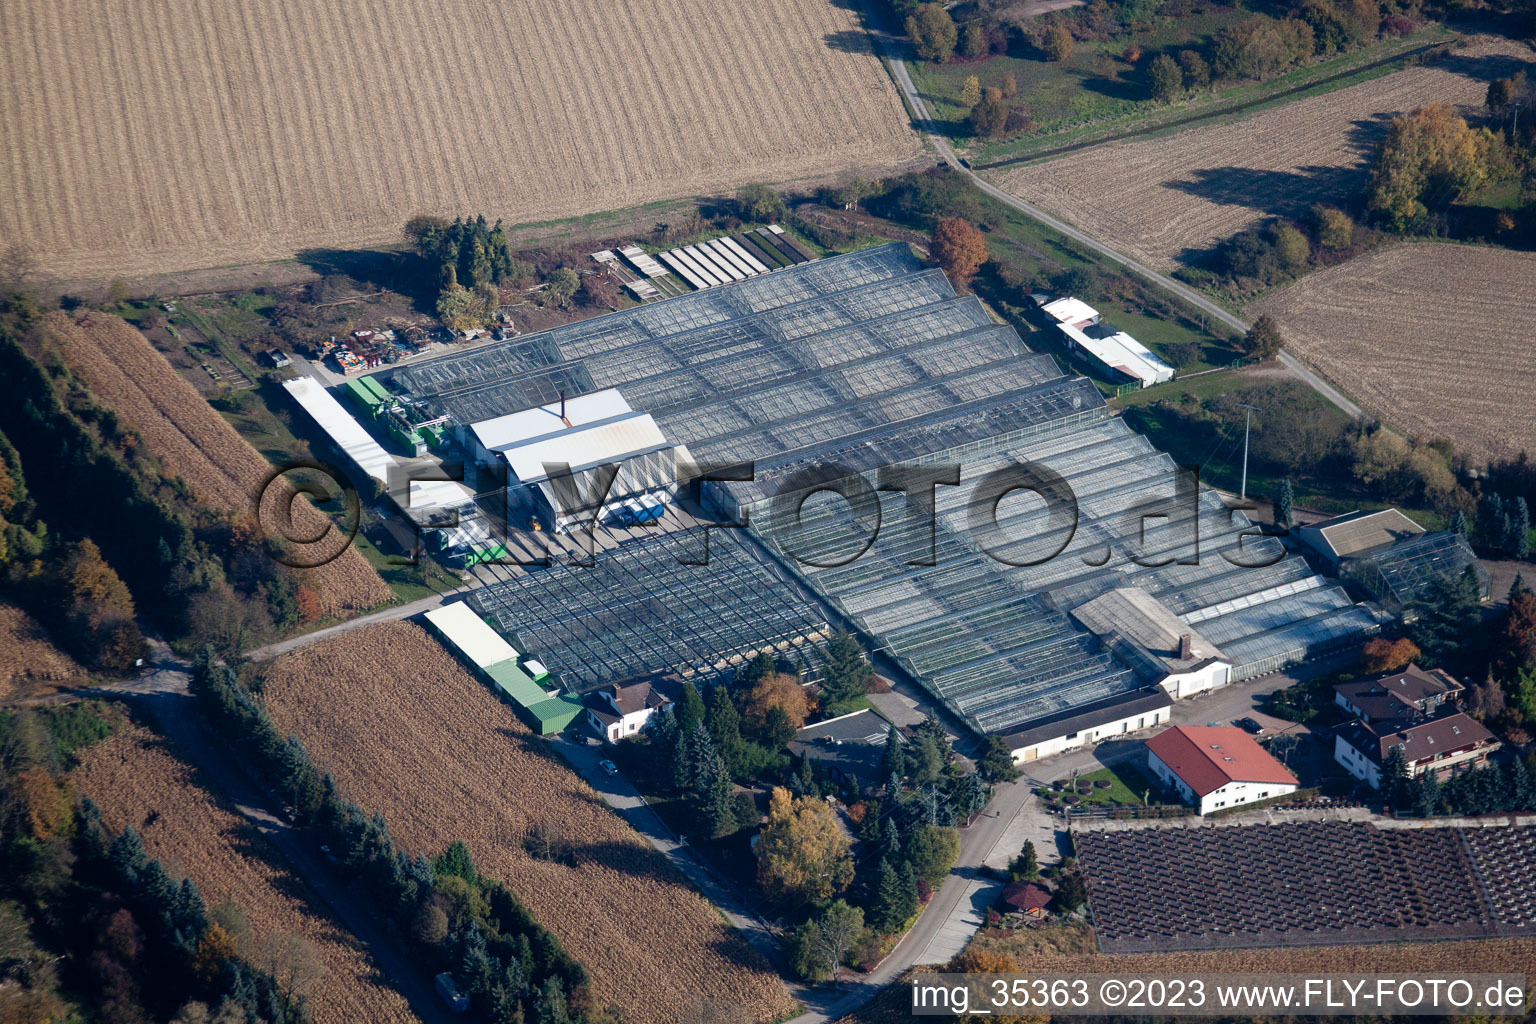 Drone recording of Geranium Endisch GmbH in Hagenbach in the state Rhineland-Palatinate, Germany